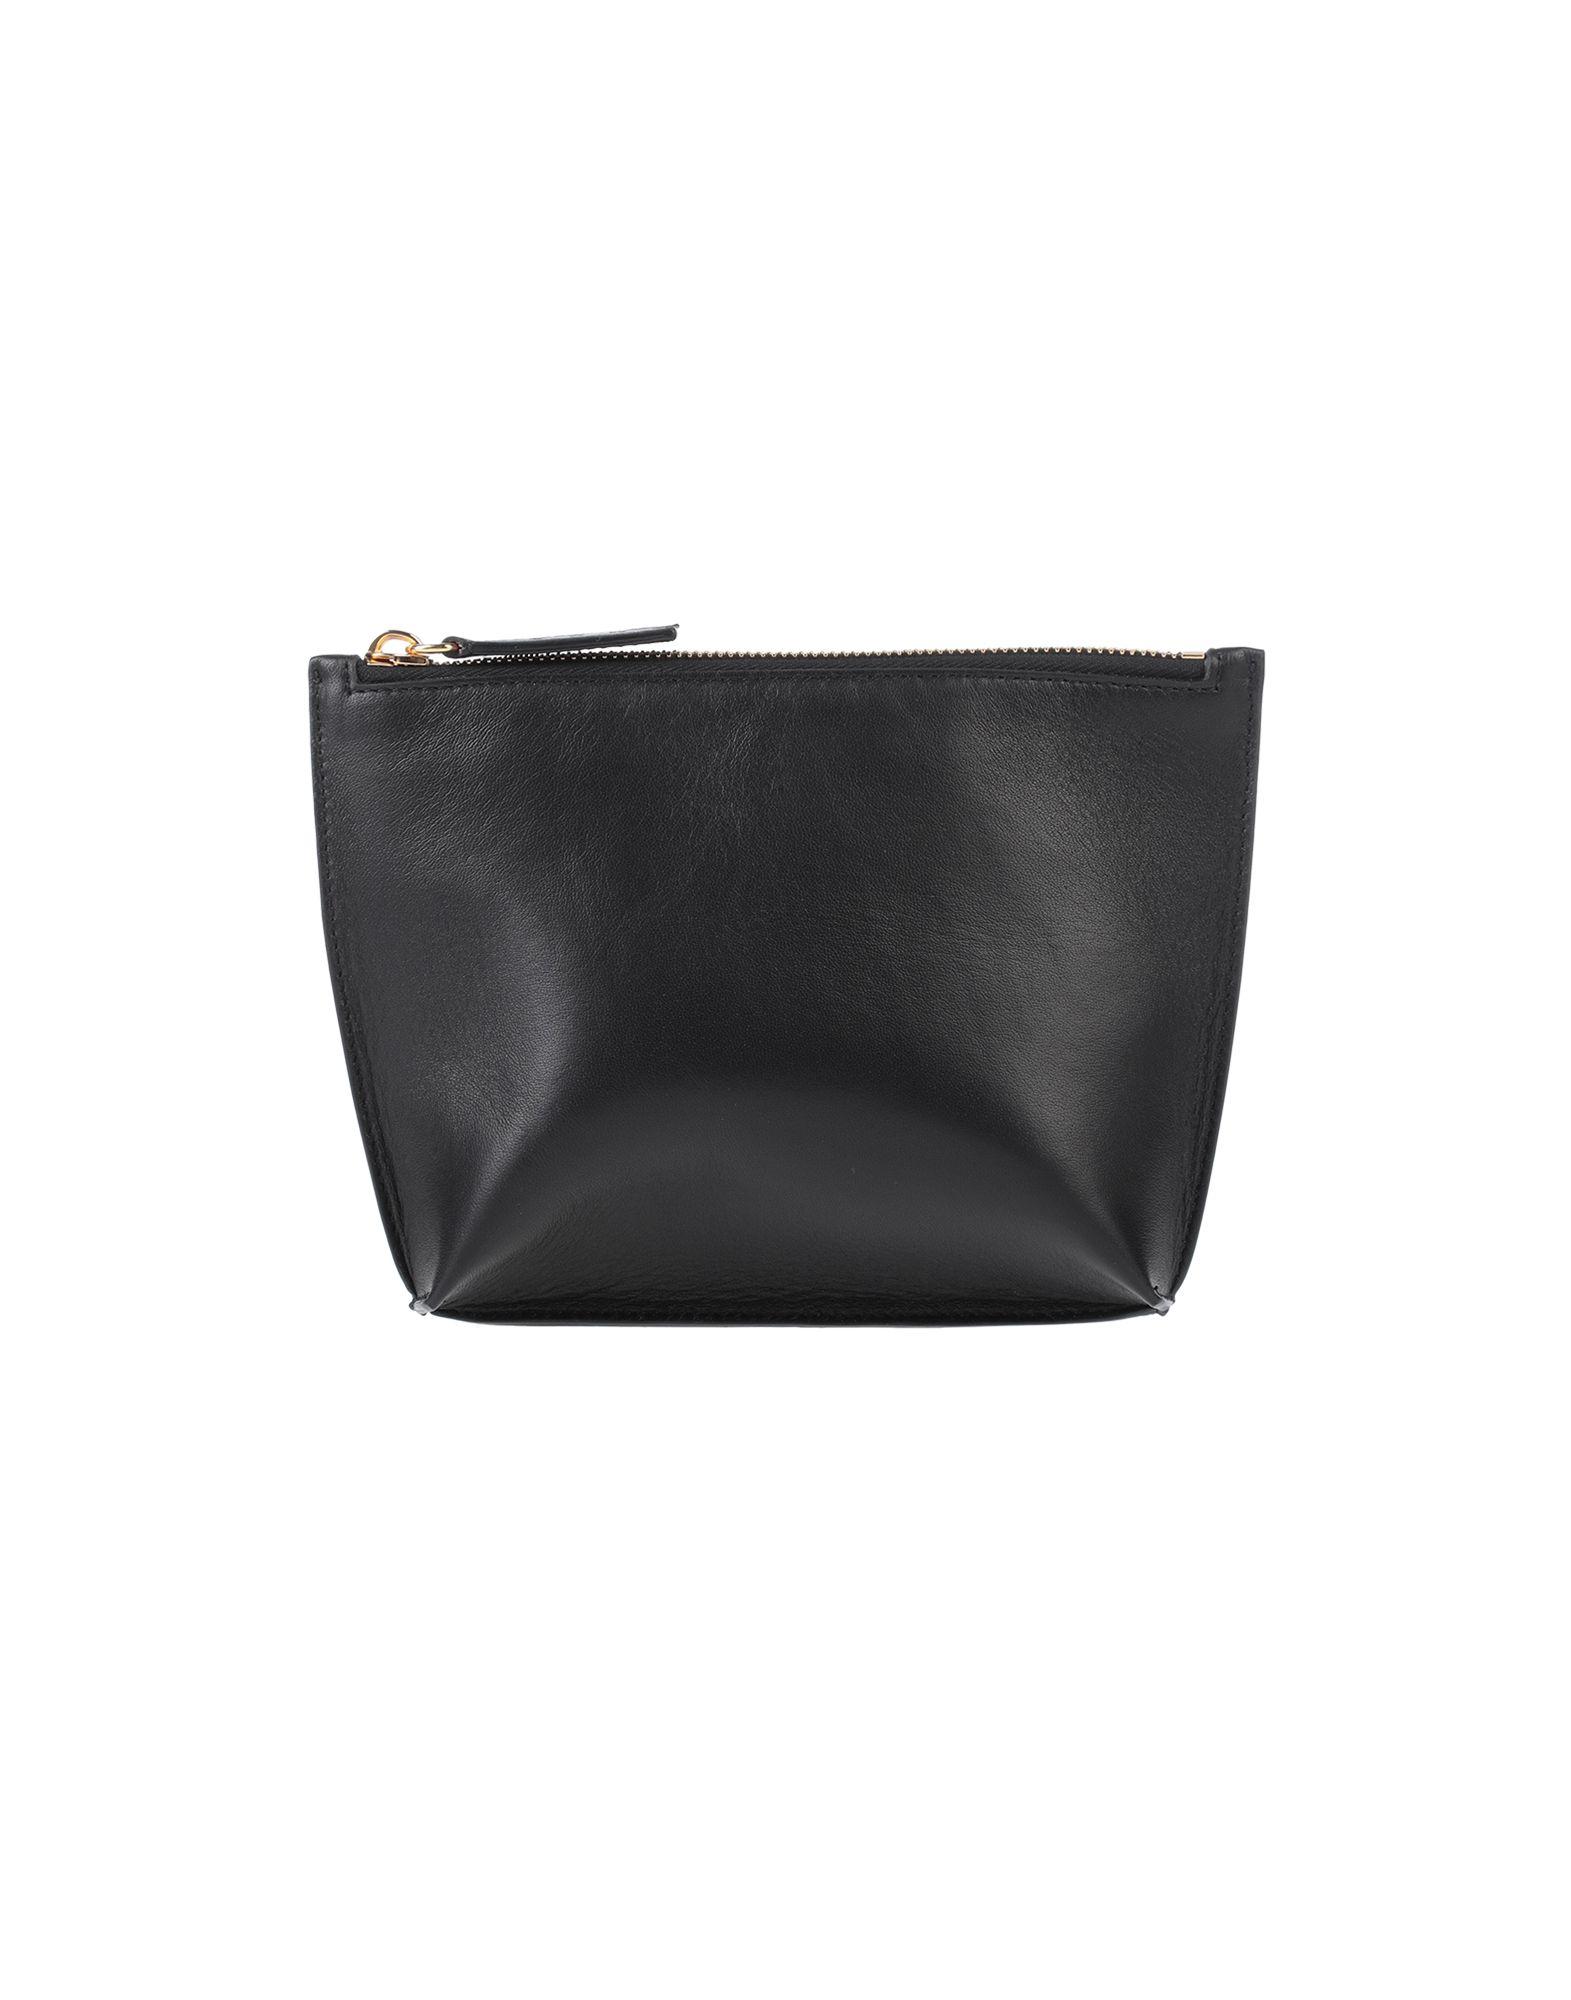 Marni Leather Pouch in Black - Lyst